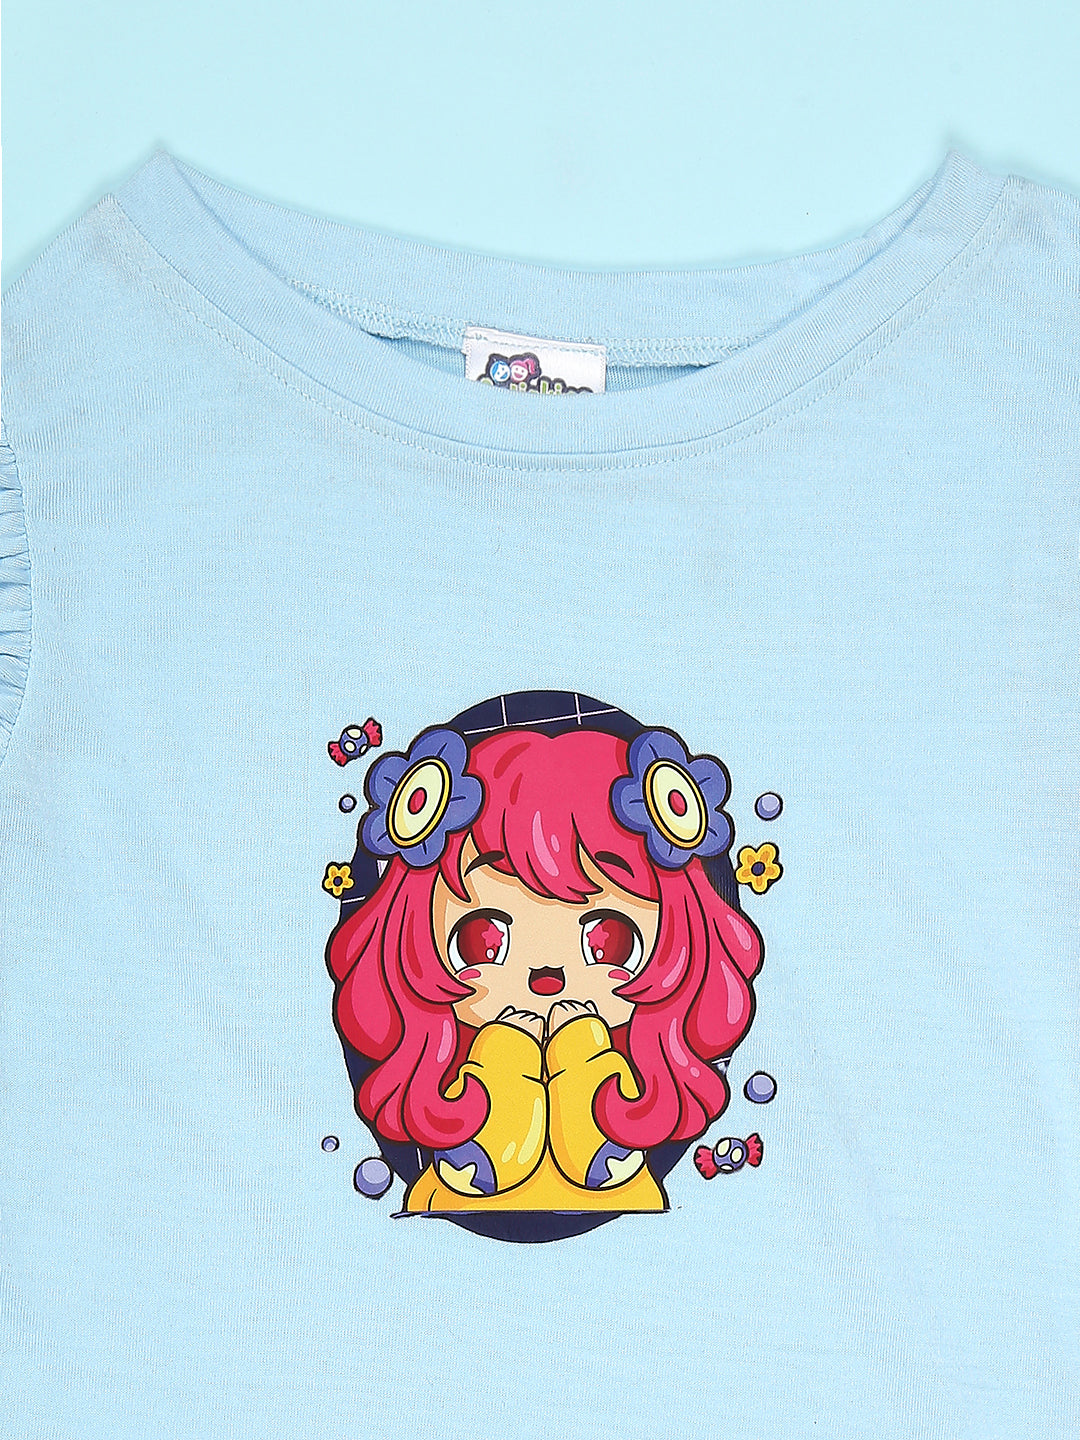 Cutiekins Girls Graphic Print T-Shirt With Solid Embellished Bow Short -Sky Blue & Magenta Pink